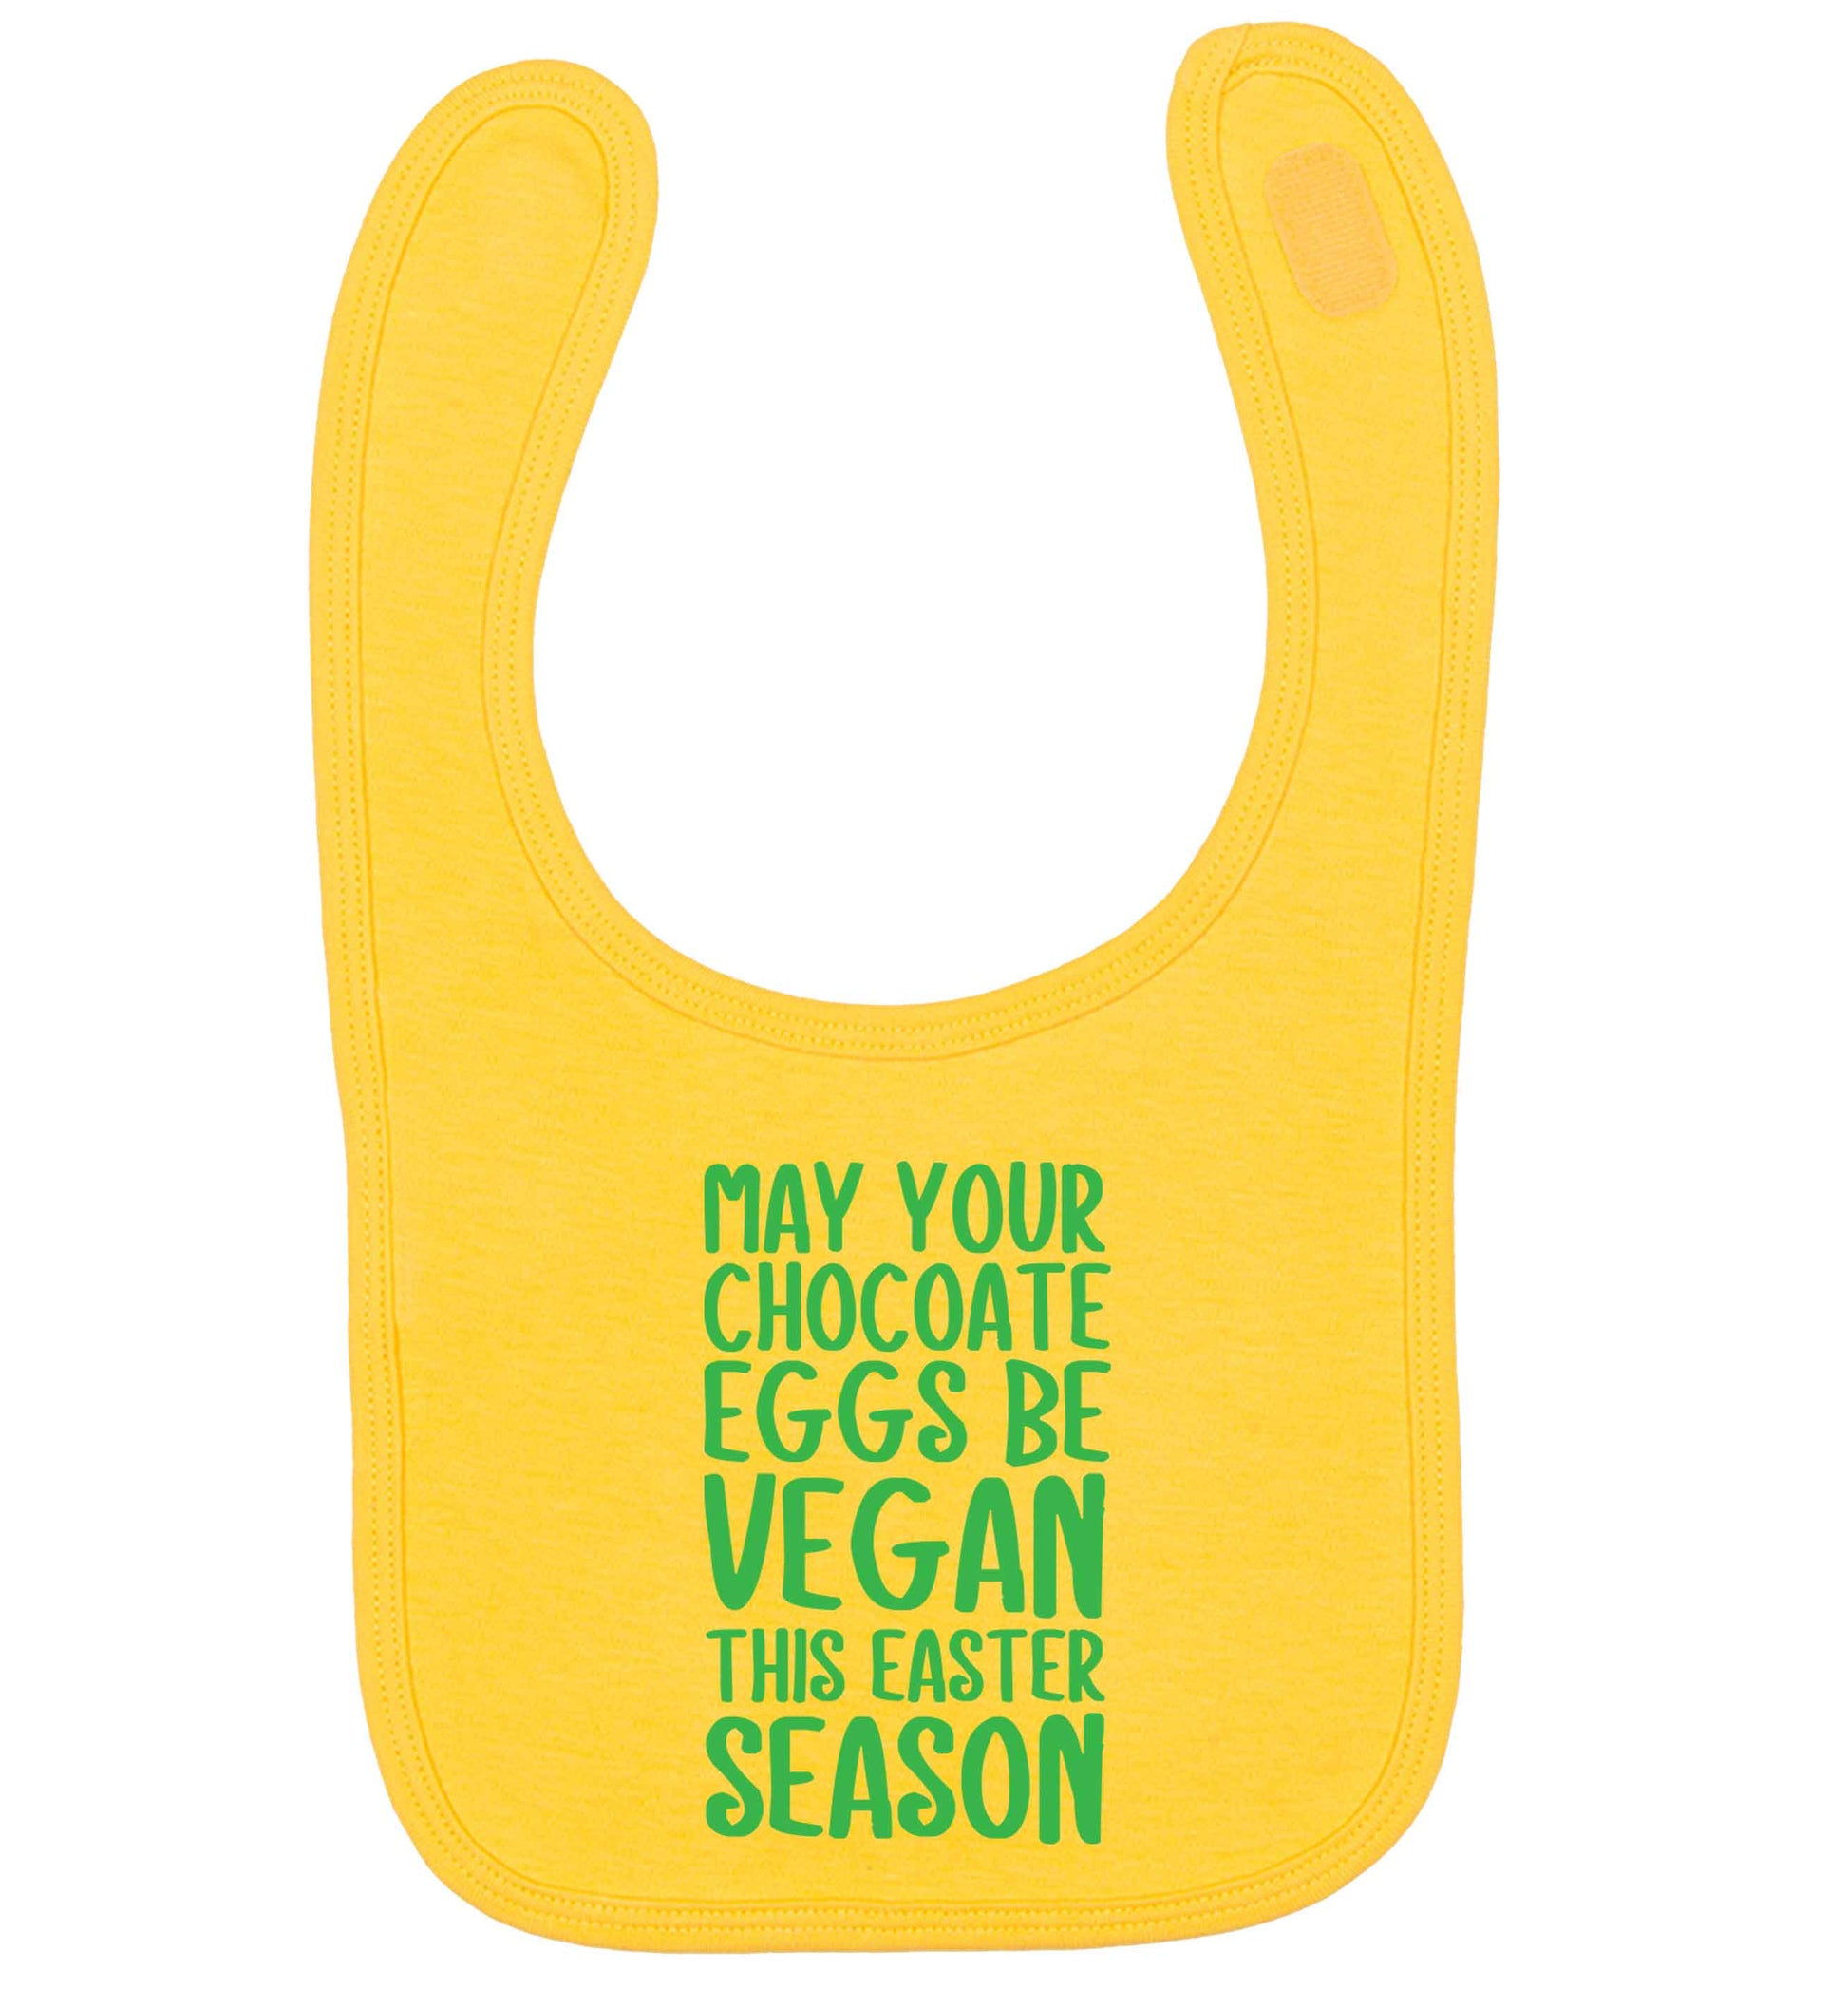 Easter bunny approved! Vegans will love this easter themed yellow baby bib